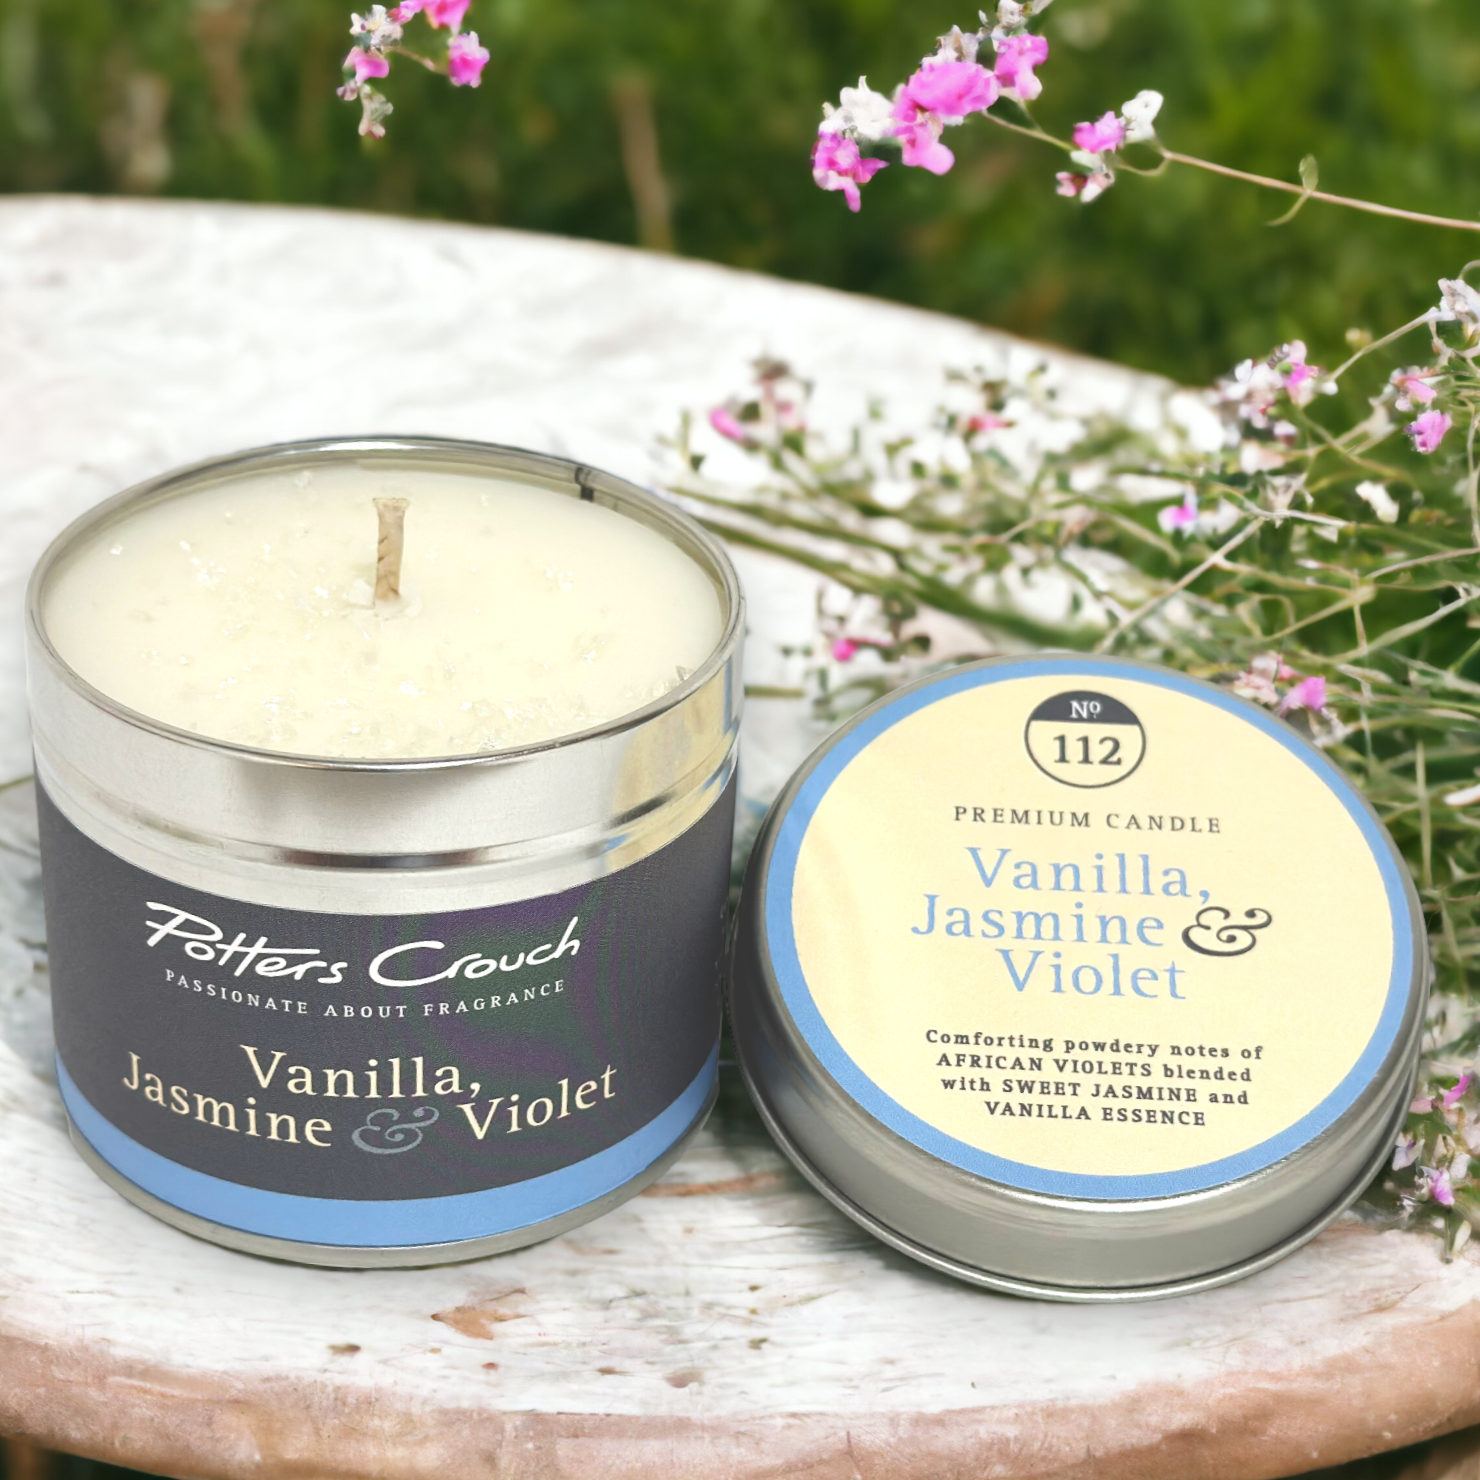 Sweet & comforting with jasmine & violet & a dash of vanilla oil.